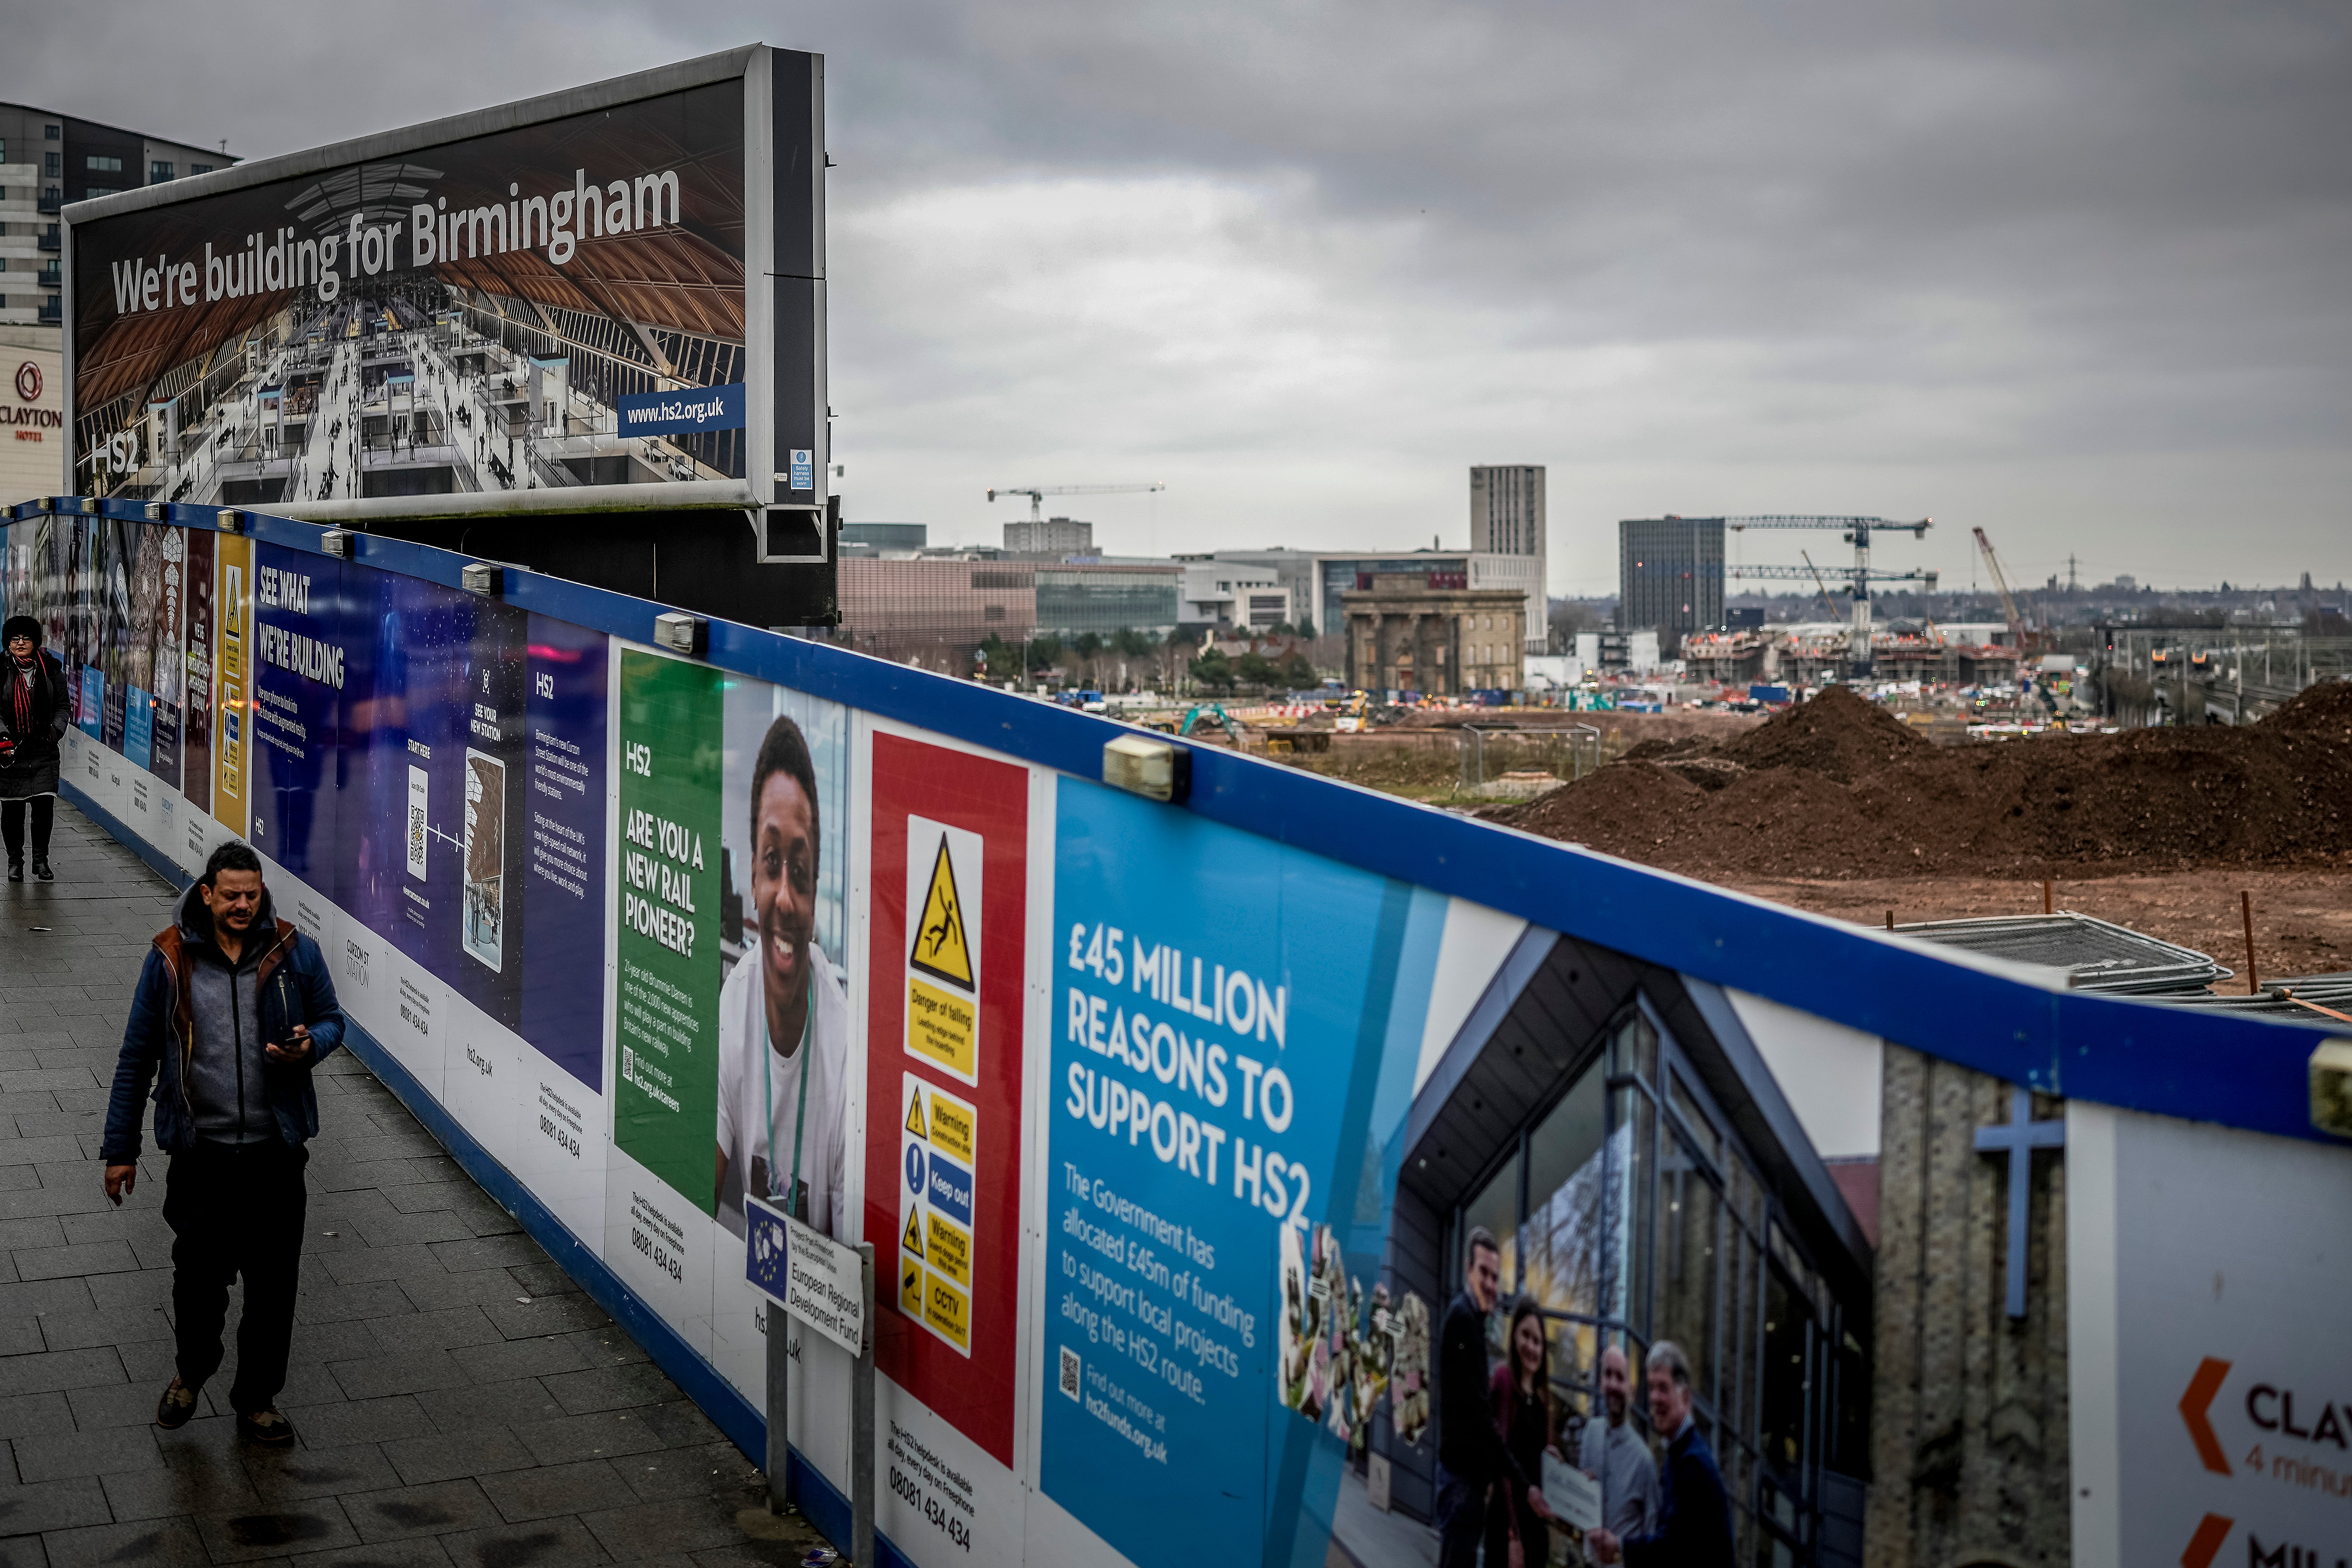 Birmingham’s HS2 station is still going ahead, with the construction site at Curzon Street